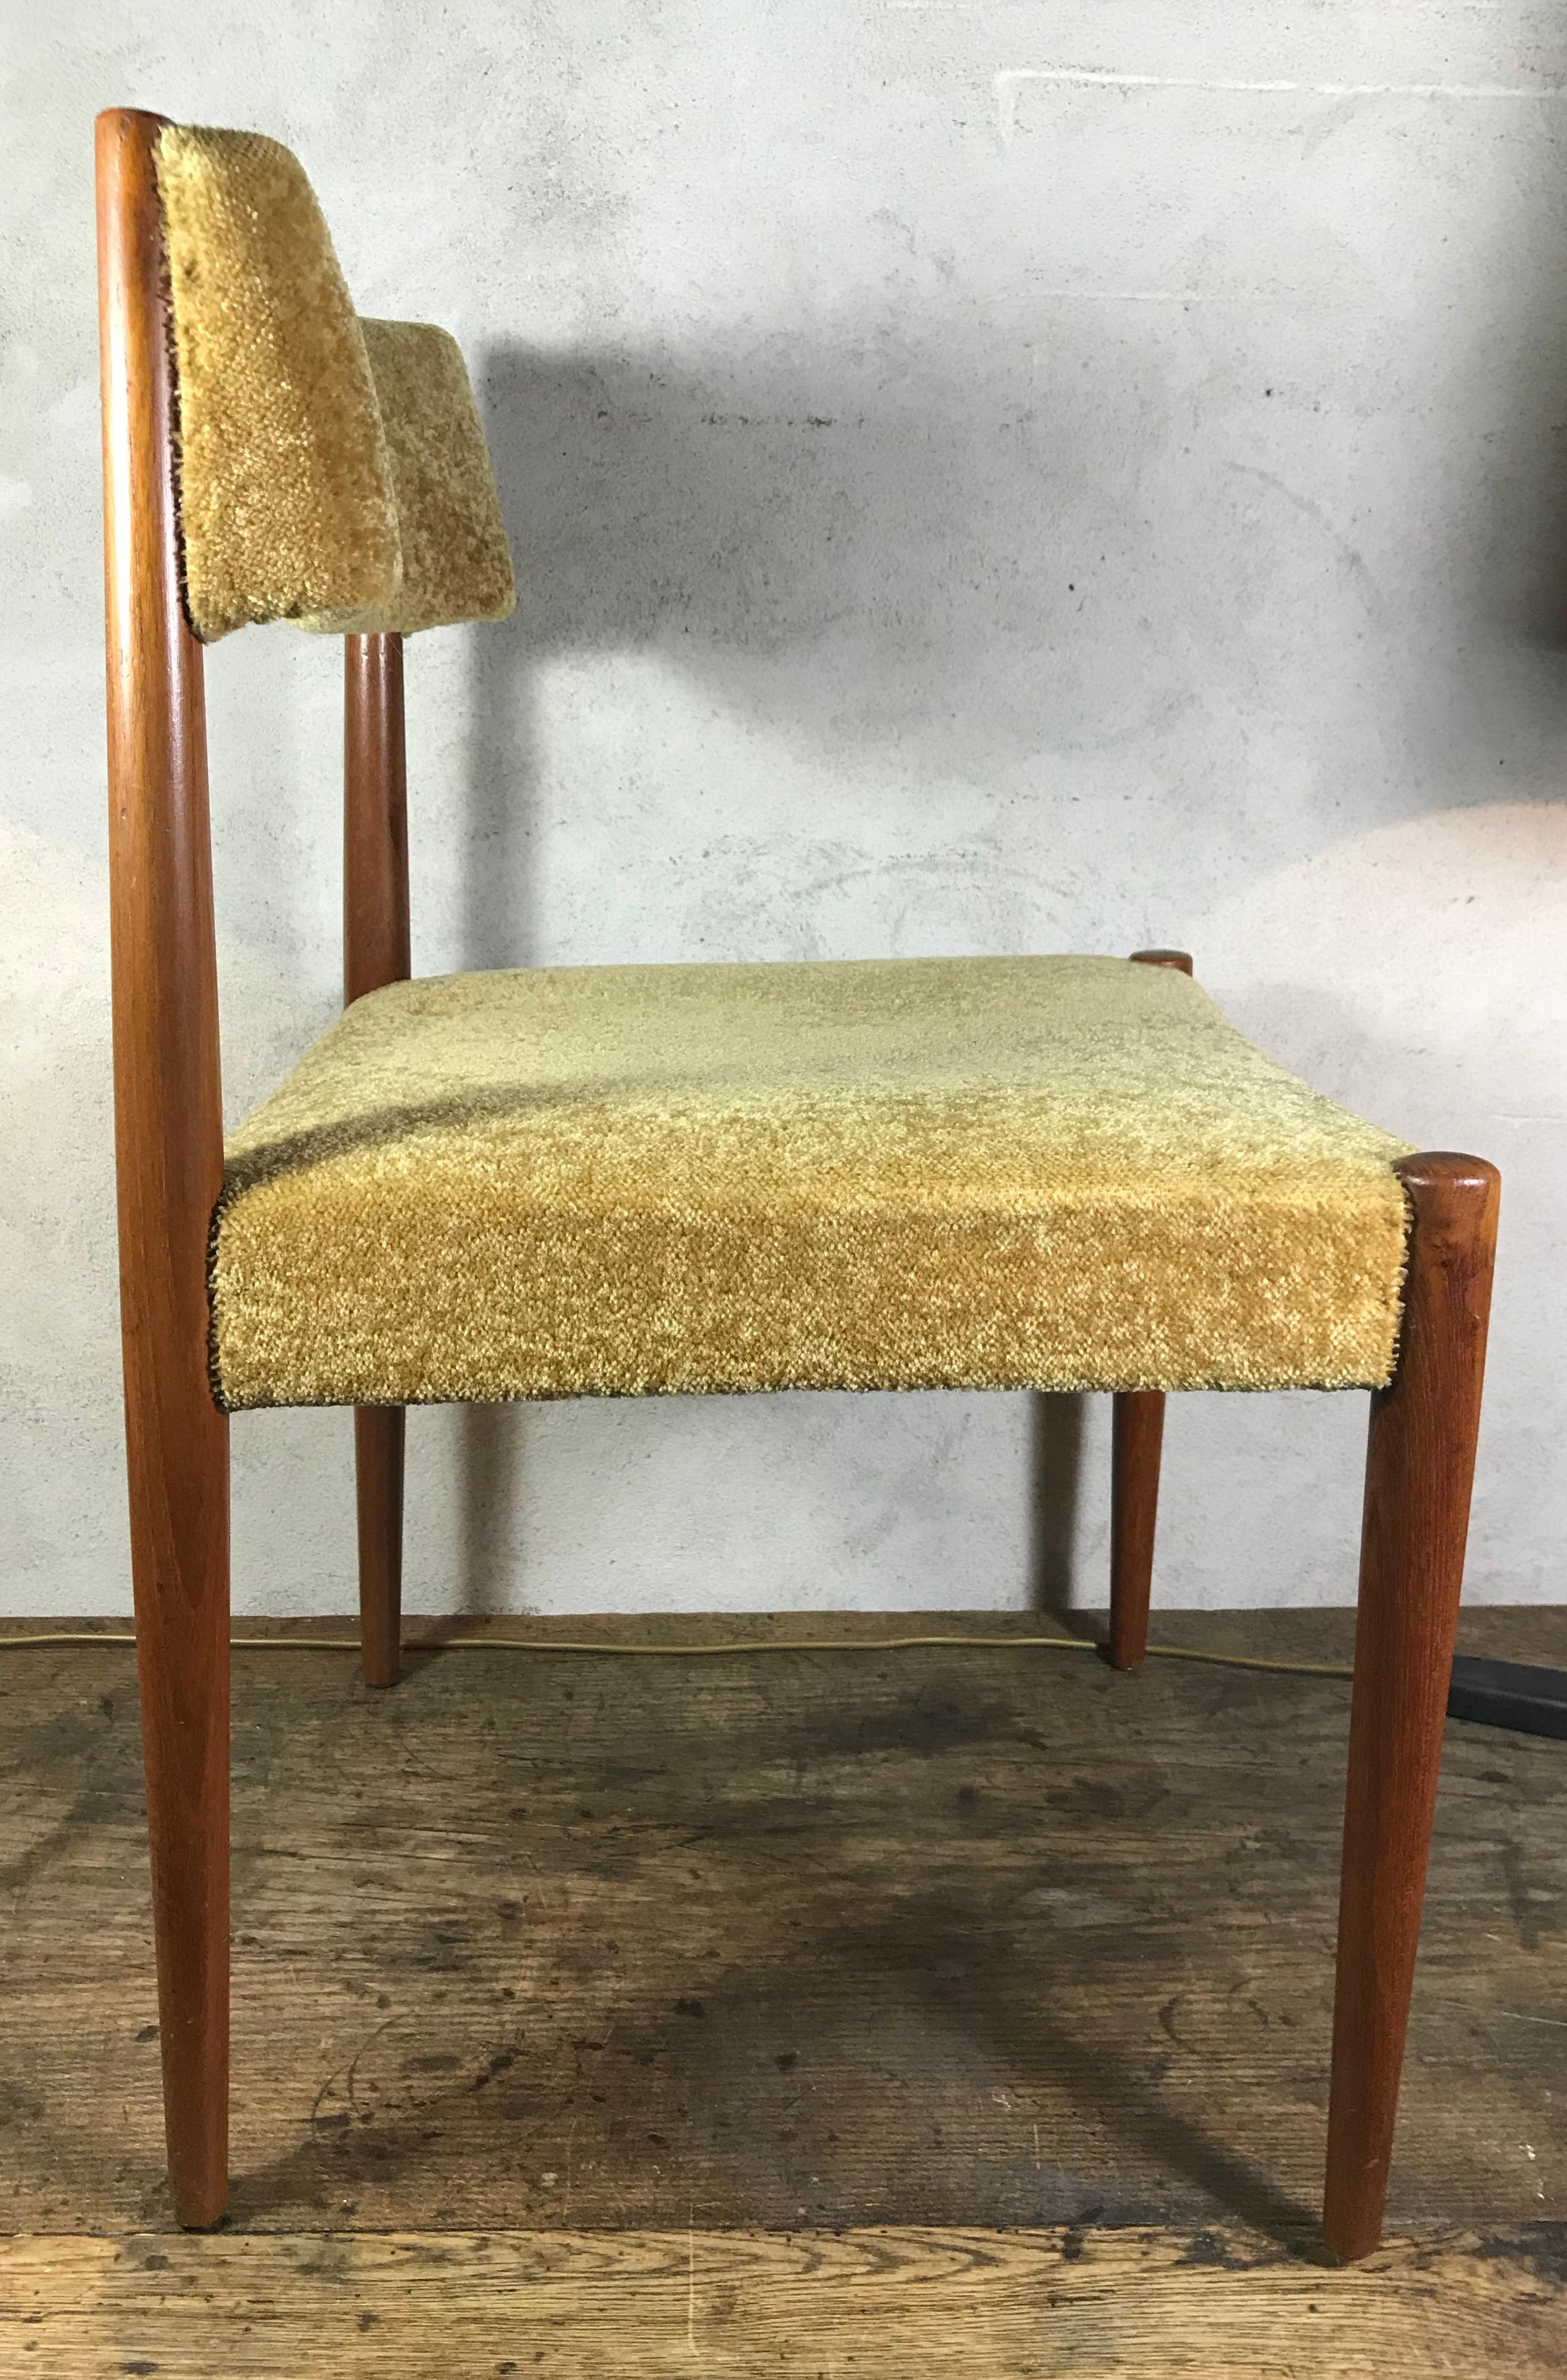 Set of 4 Aksel Bender Madsen dining room chairs with the original fabric, Denmark, 1960s.